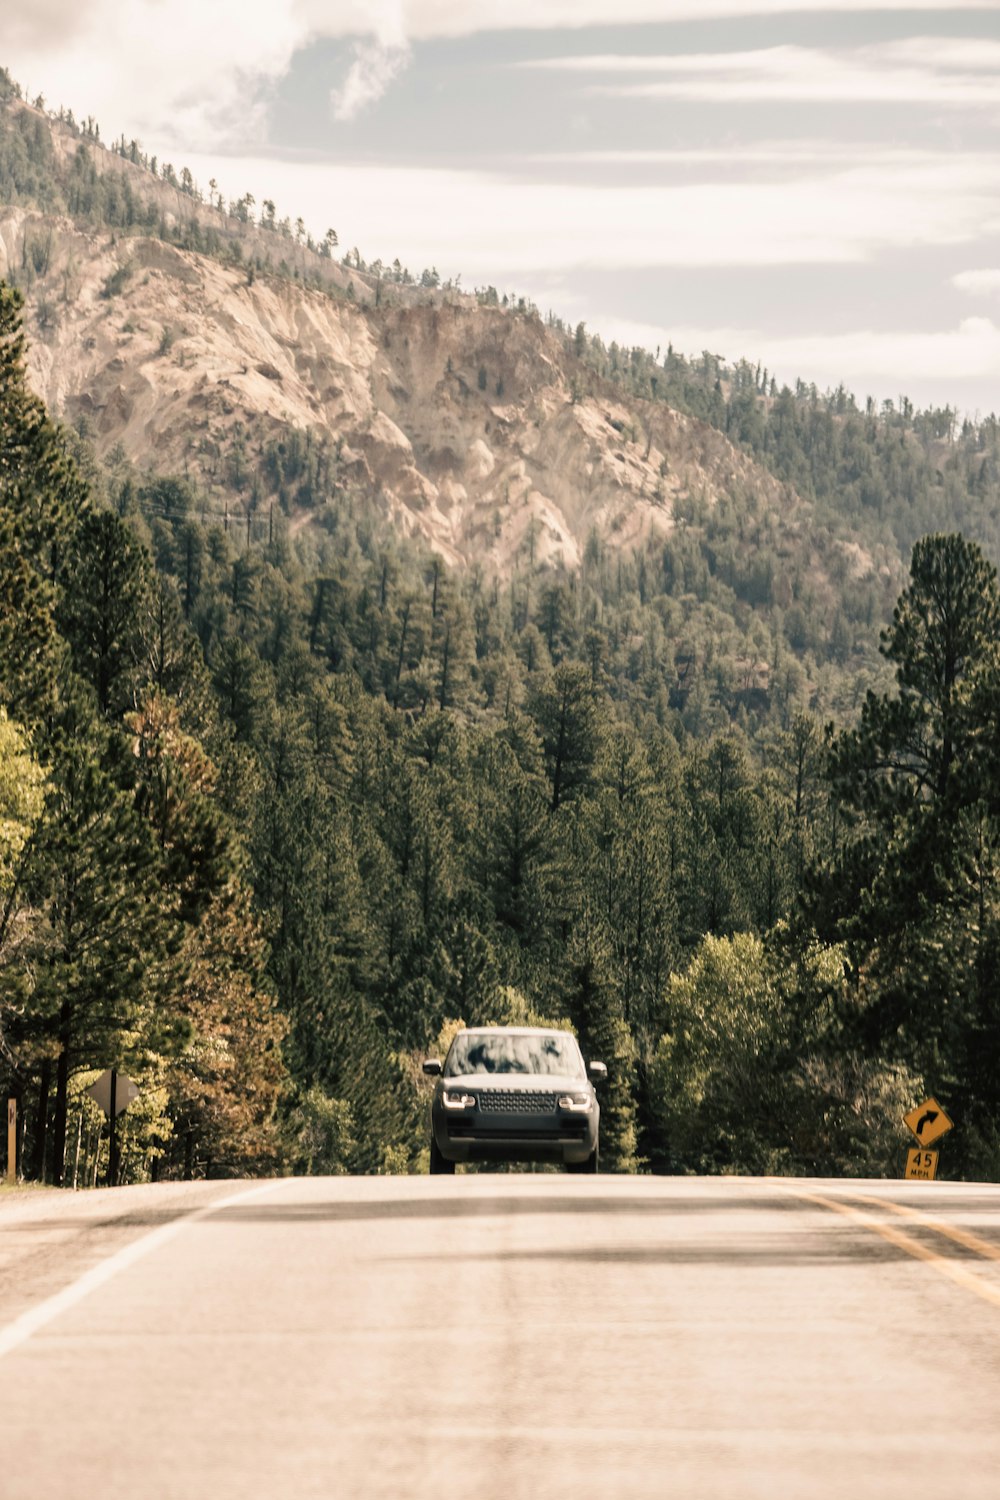 a car driving on a road with trees and mountains in the background